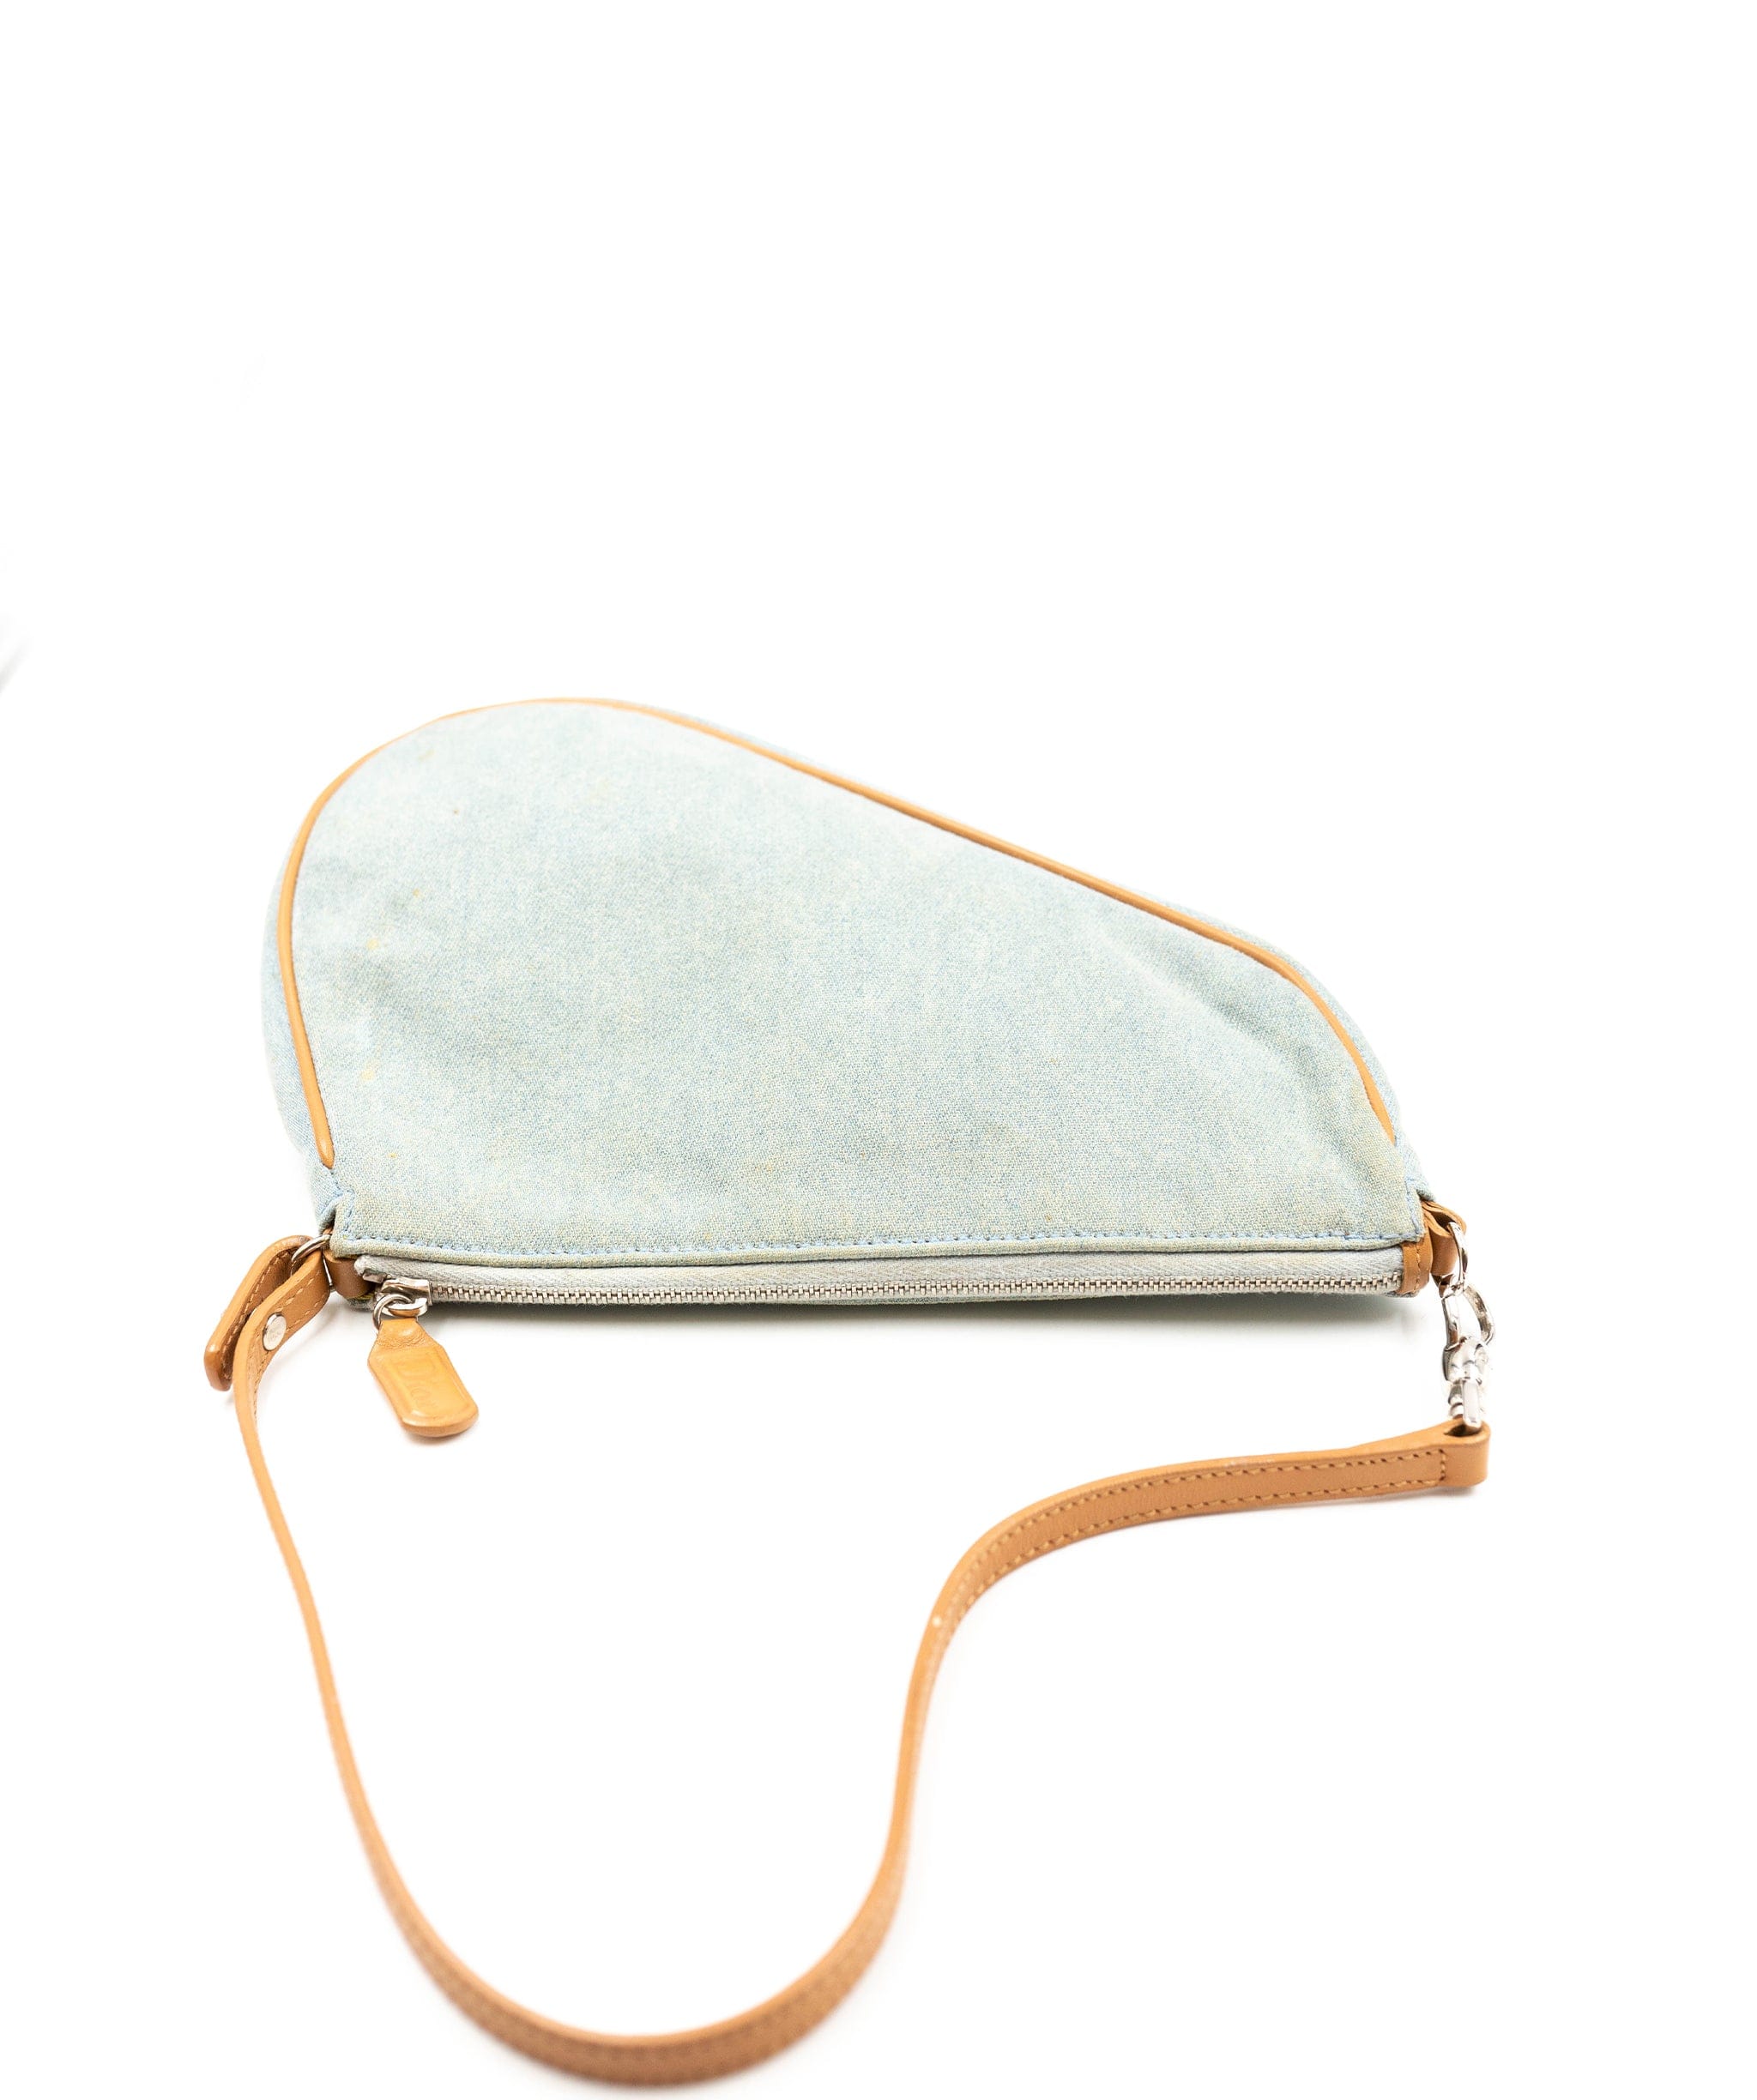 Christian Dior Christian Dior vintage light denim saddle bag. Features tan leather handle and traimmings, as well as silver hardware.  AGL2307